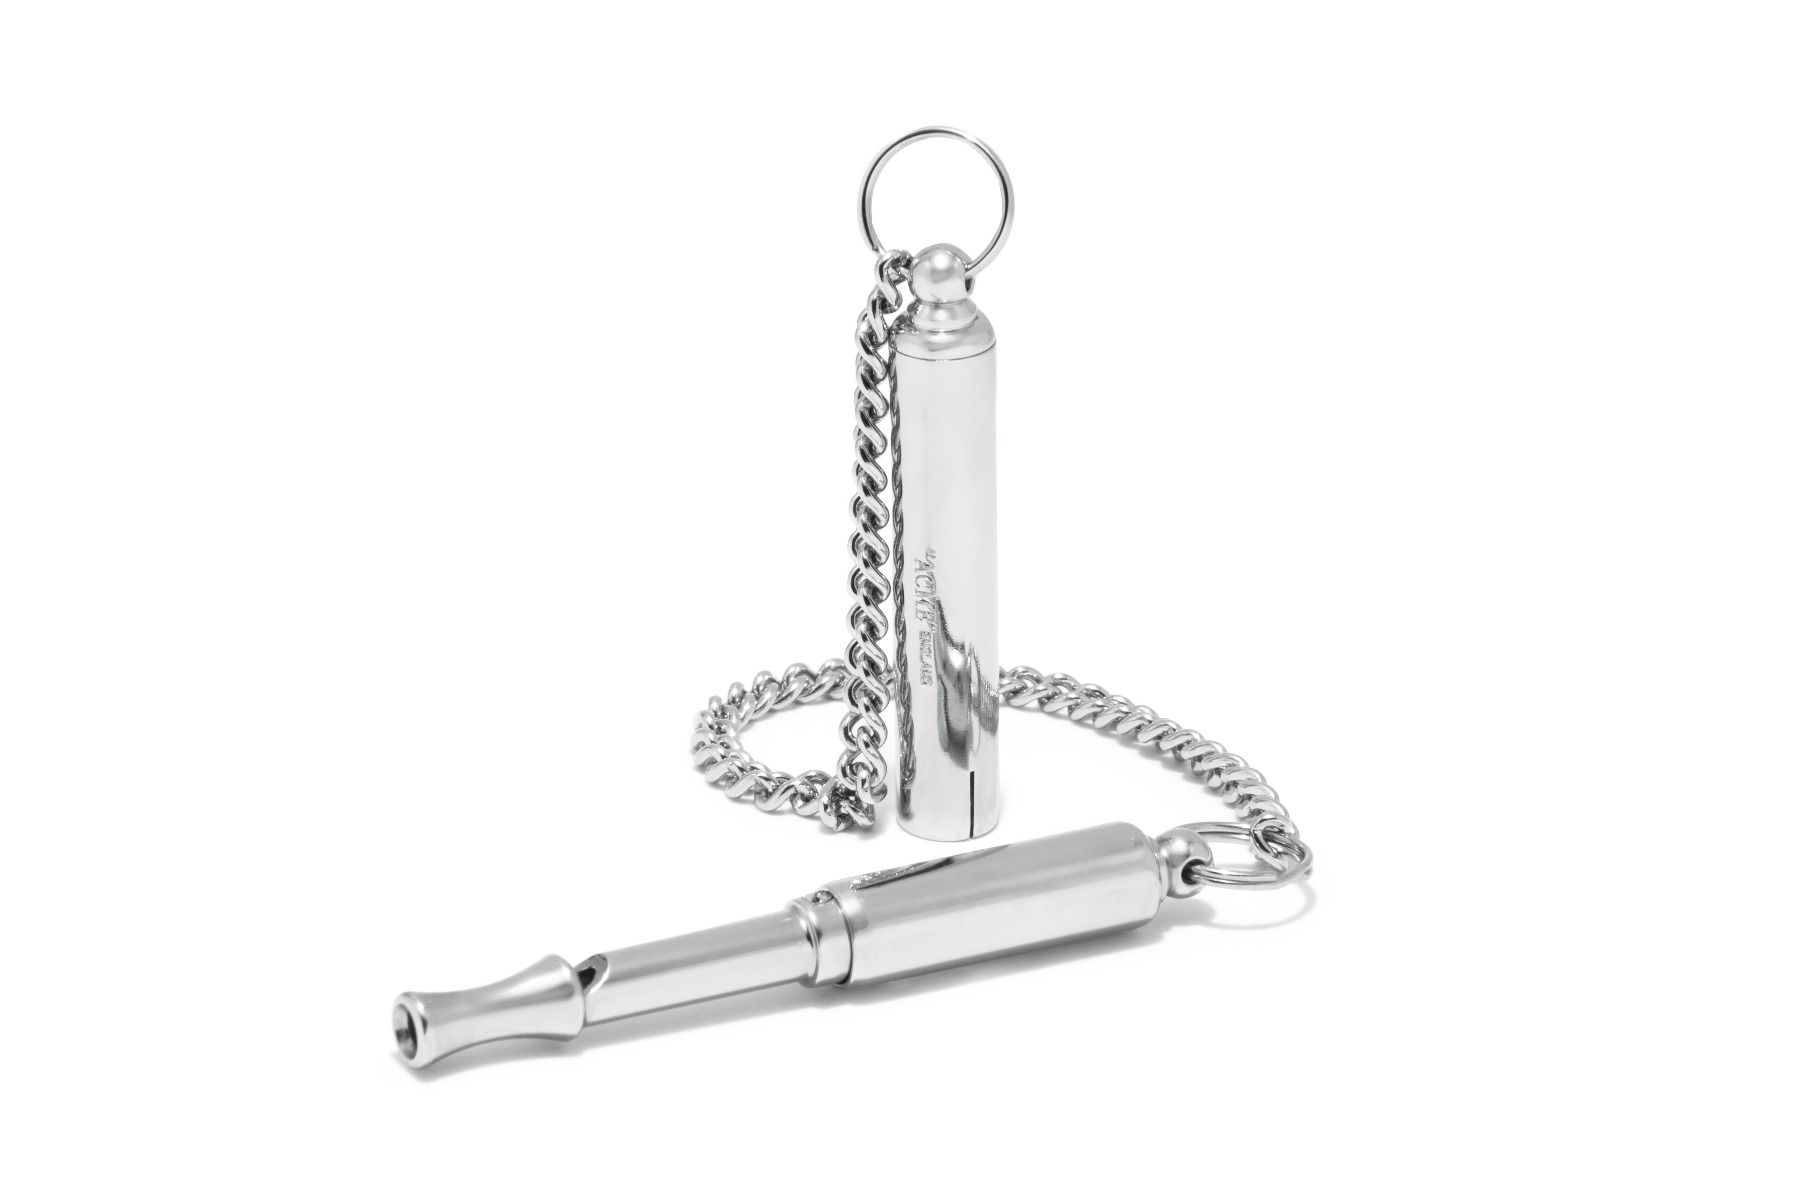 Nickel Plated ACME 535 Silent Dog whistle